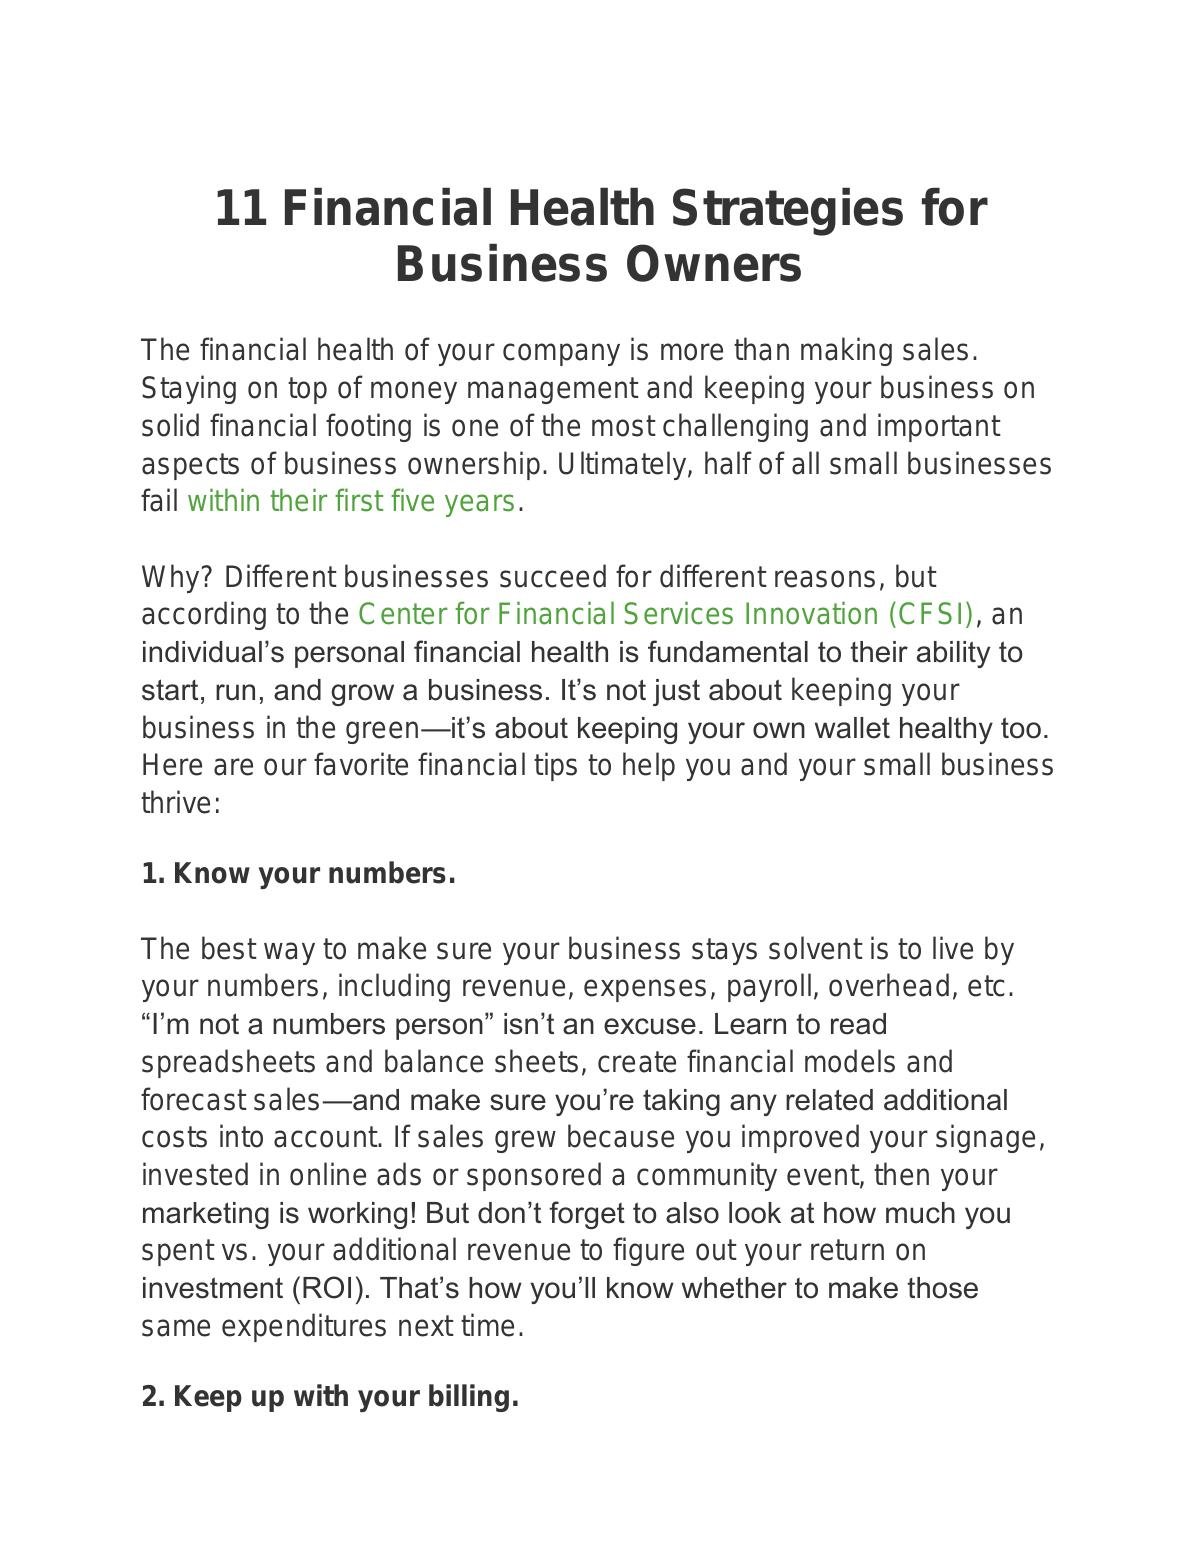 11 Financial Health Strategies for Business Owners